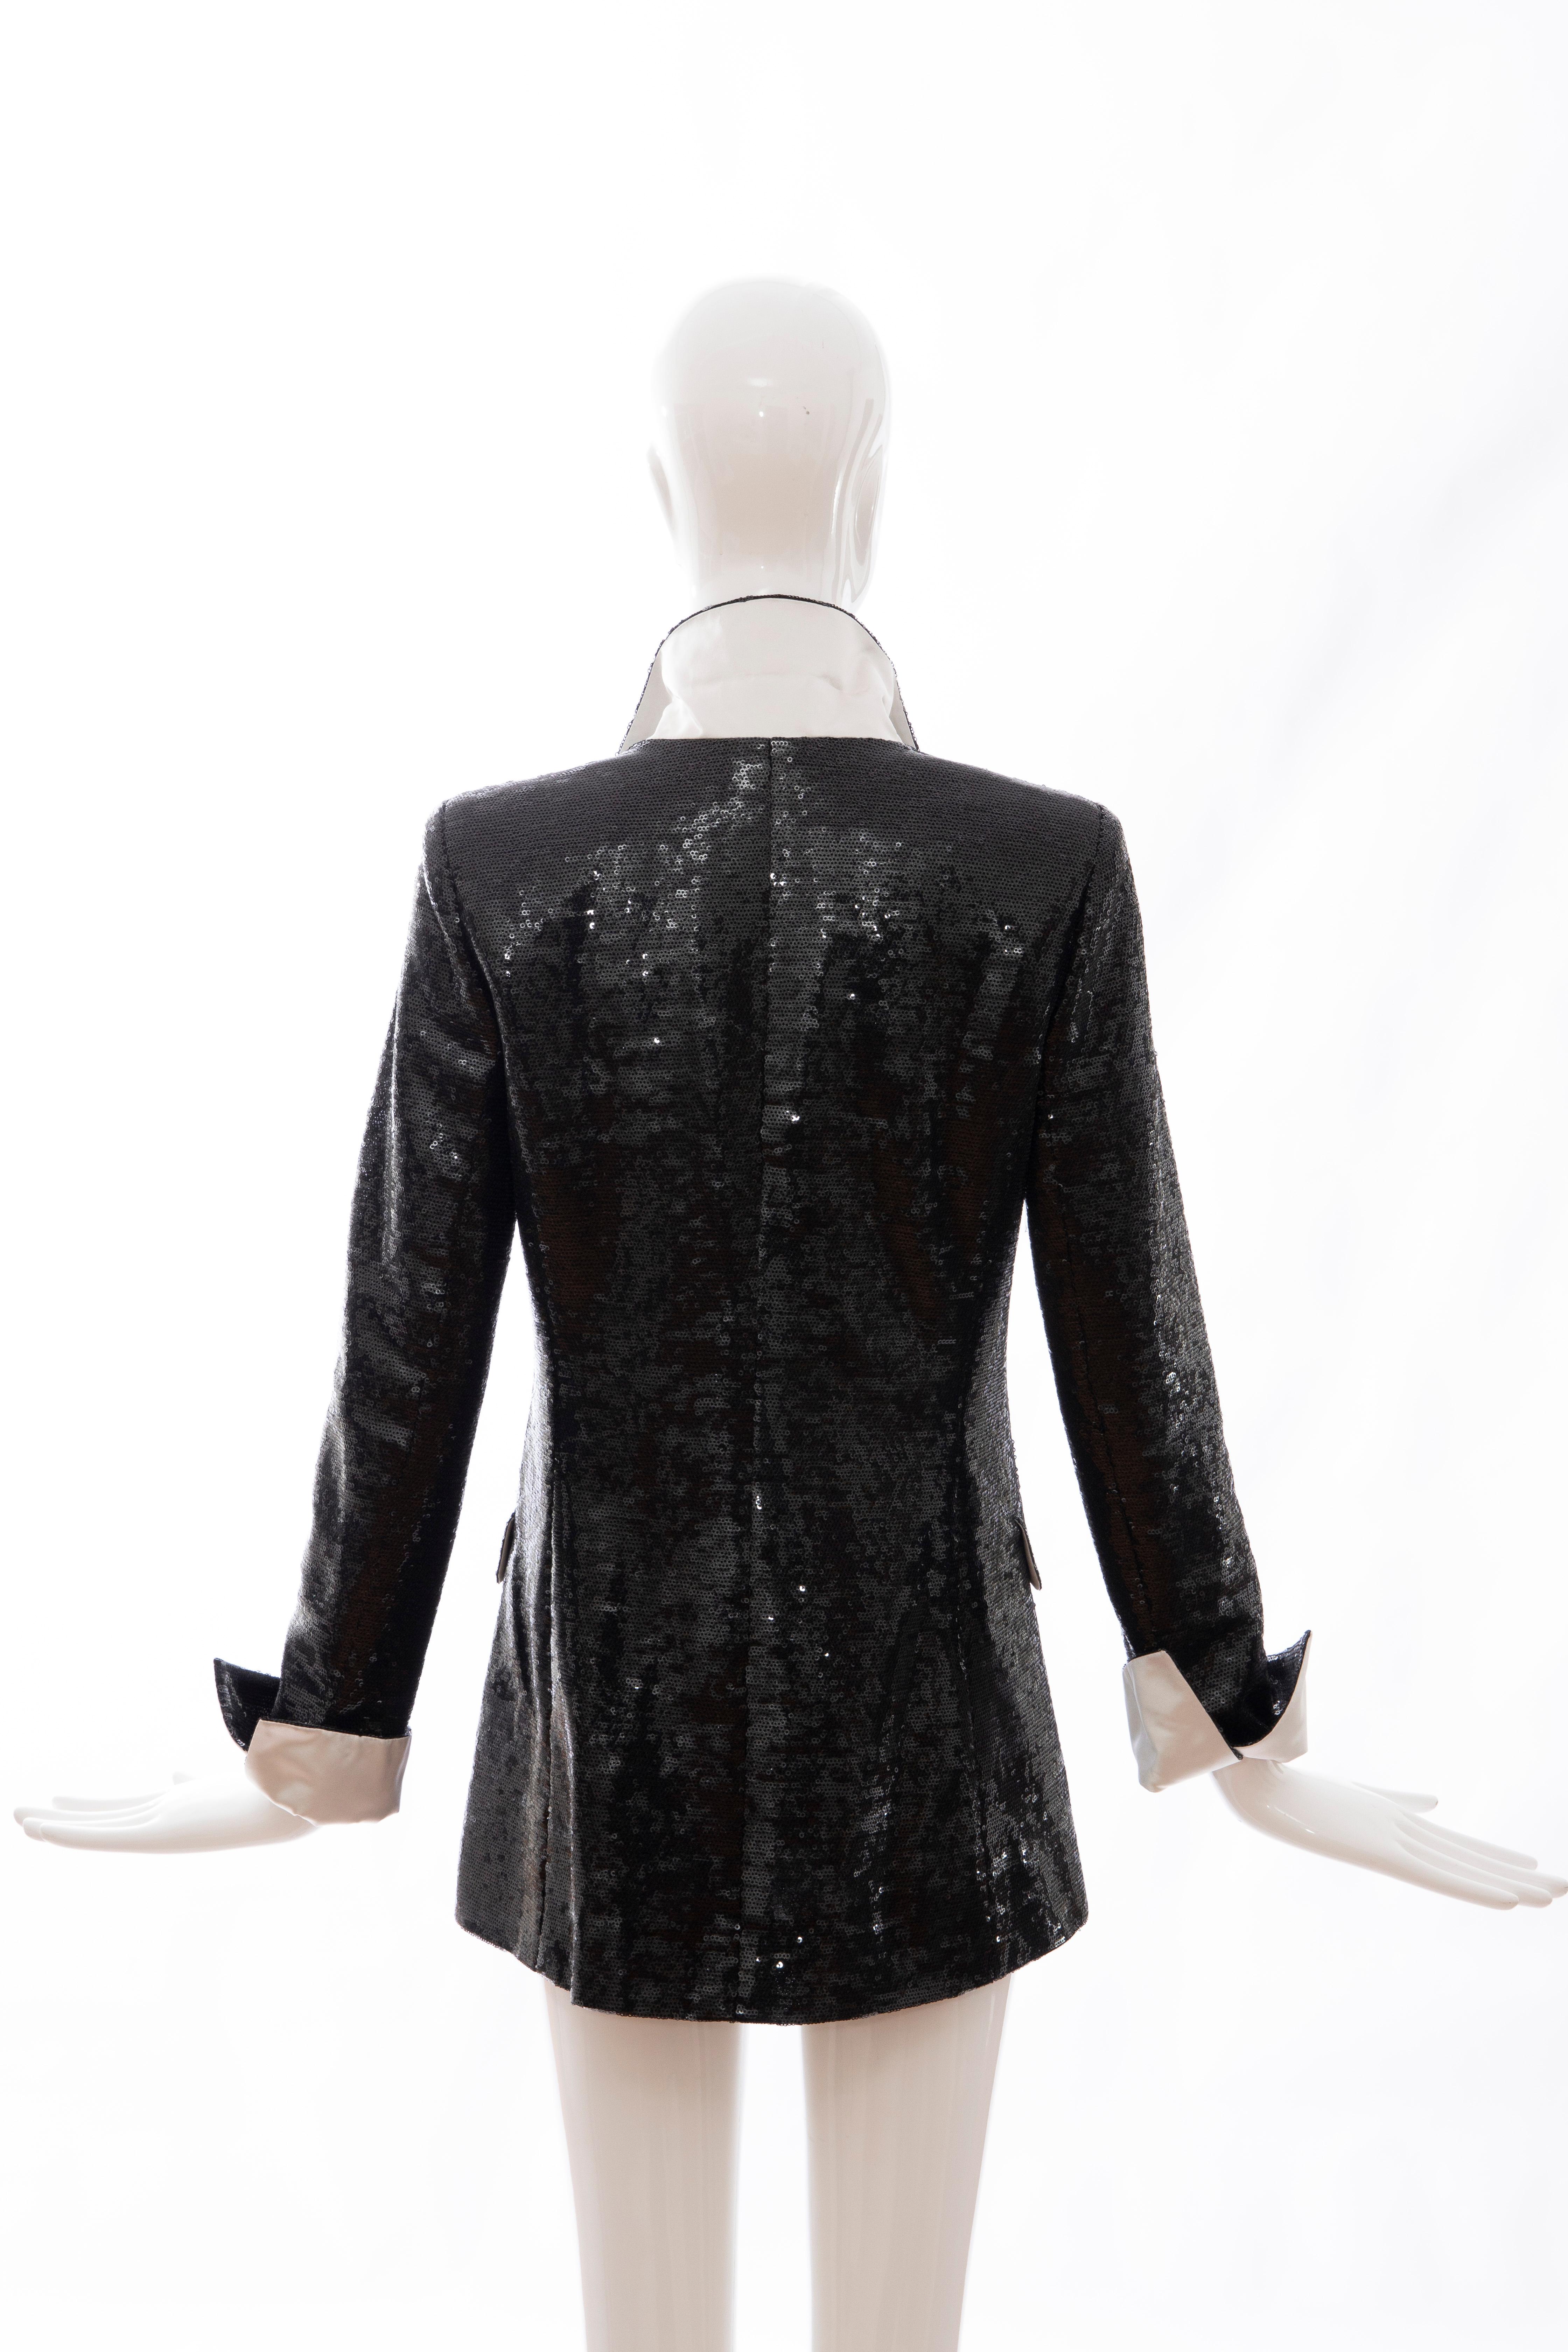 Women's Chanel Black Embroidered Sequin Evening Jacket Ivory Silk Cuffs, Cruise 2009 For Sale